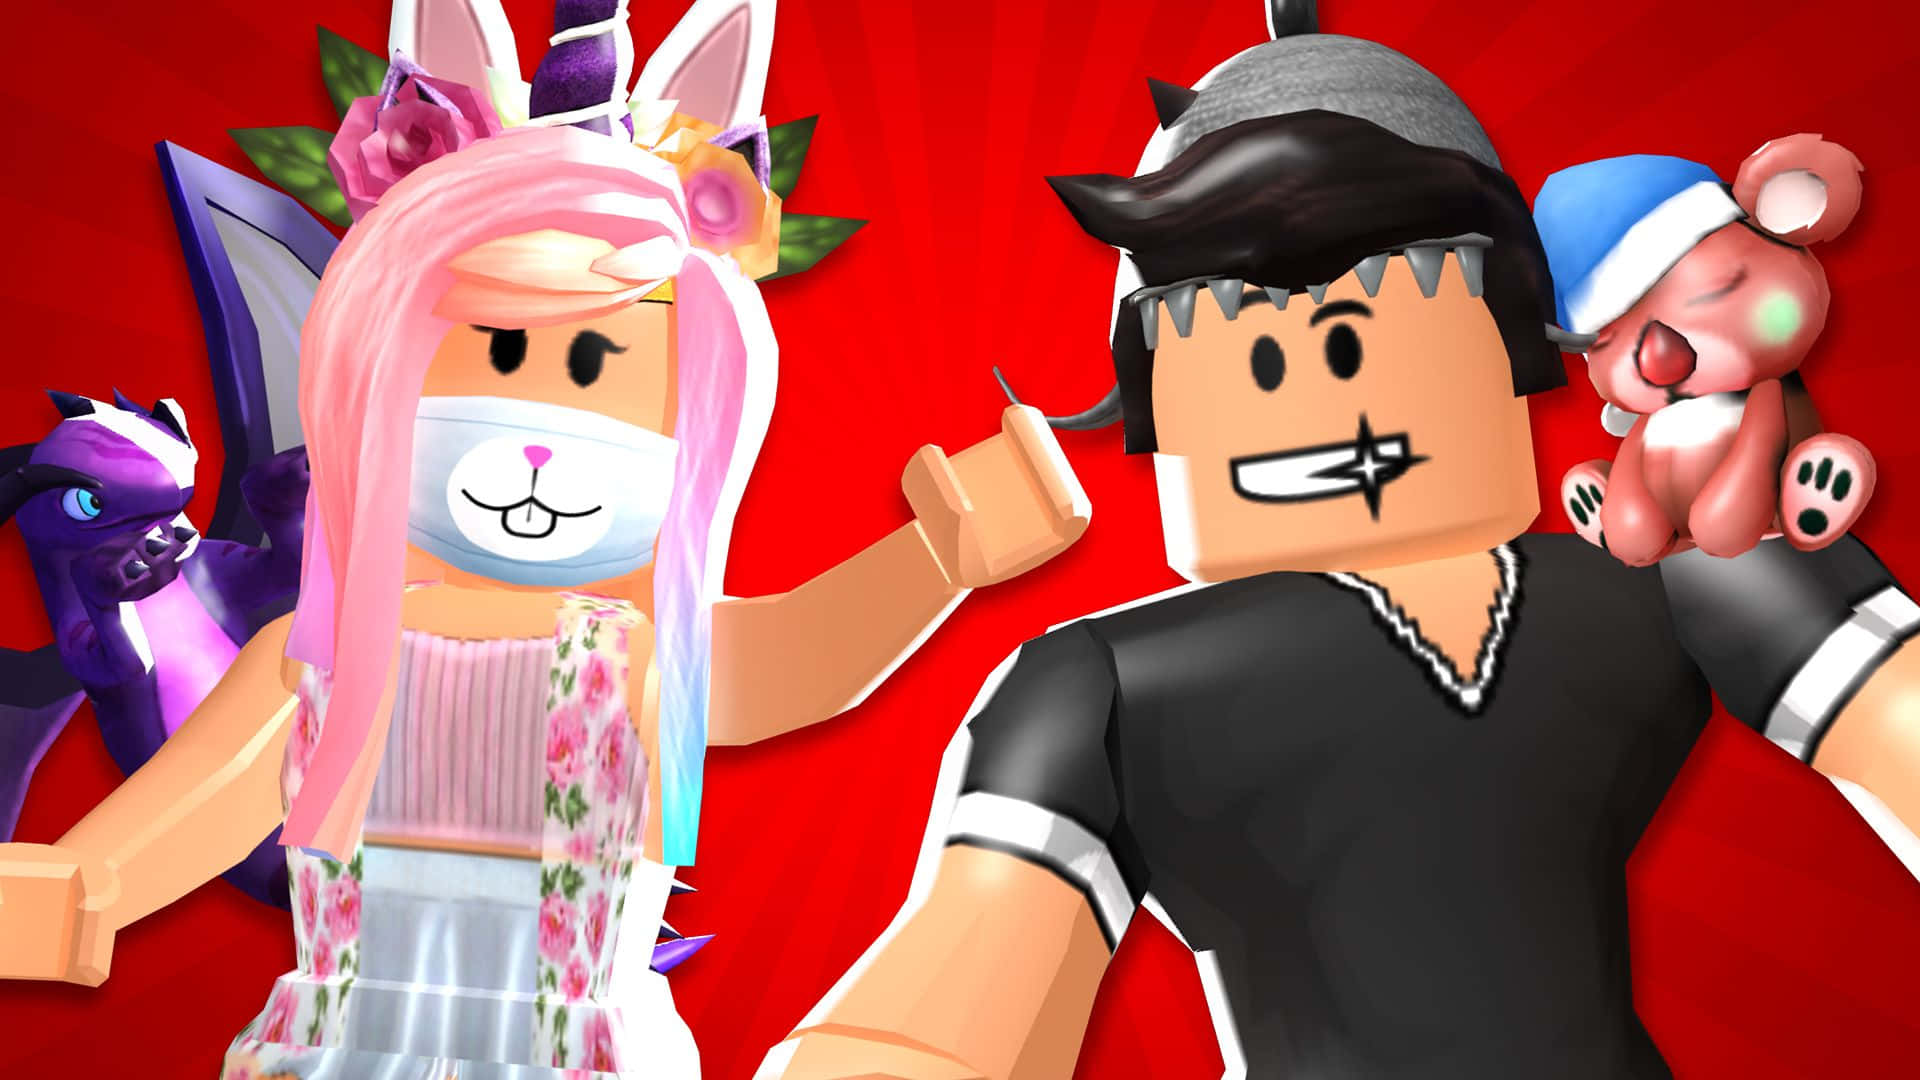 "Discover the cuteness of Roblox!"